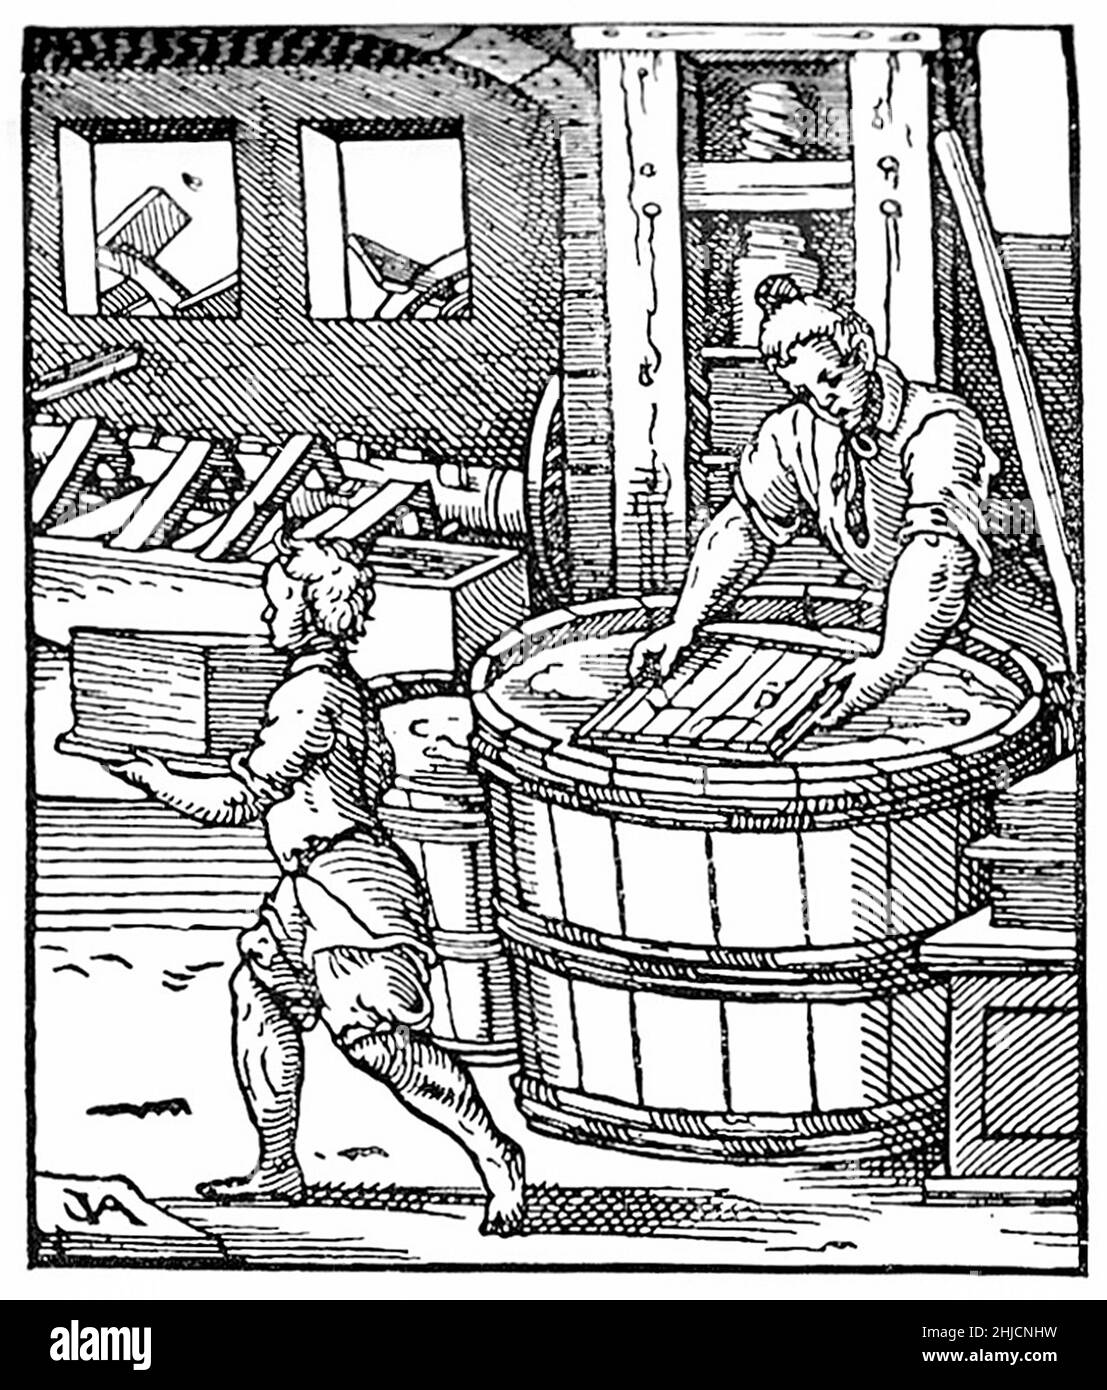 Medieval tradesmen making paper.  Water wheels (through windows) drive the pulping machinery (left, background) and the large press (right, background) used for pressing sheets of paper before drying. The man at right is arranging an even layer of pulp onto a frame ready for pressing and the boy is carrying away a stack of finished sheets. Illustration from Jost Amman's Book of Trades, 1568. Stock Photo